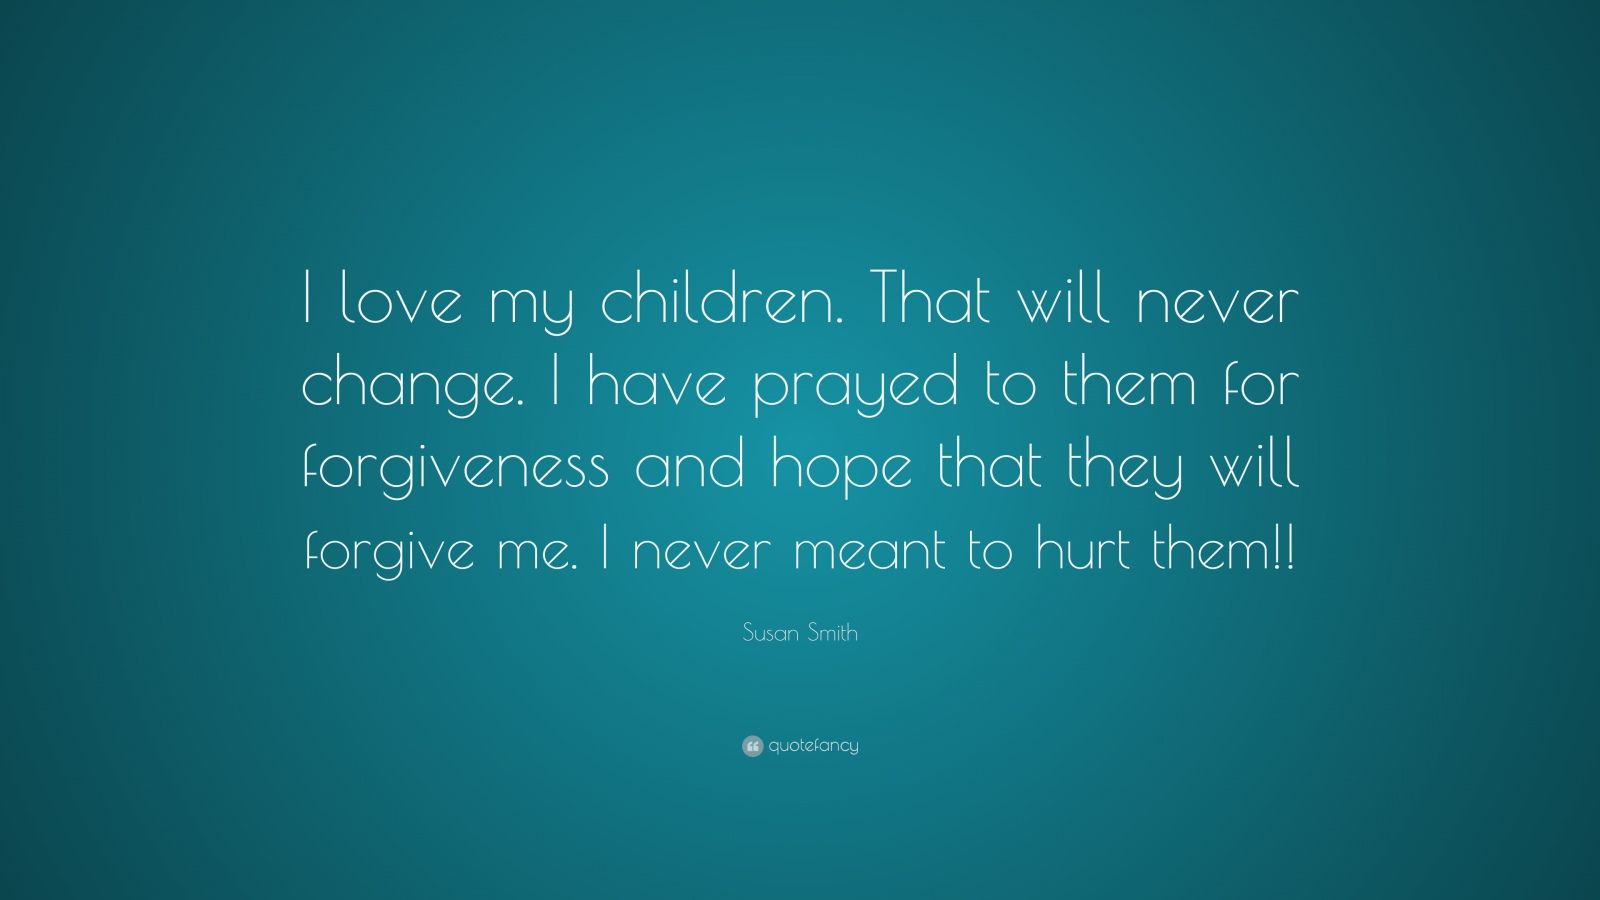 Susan Smith Quote “I love my children That will never change I